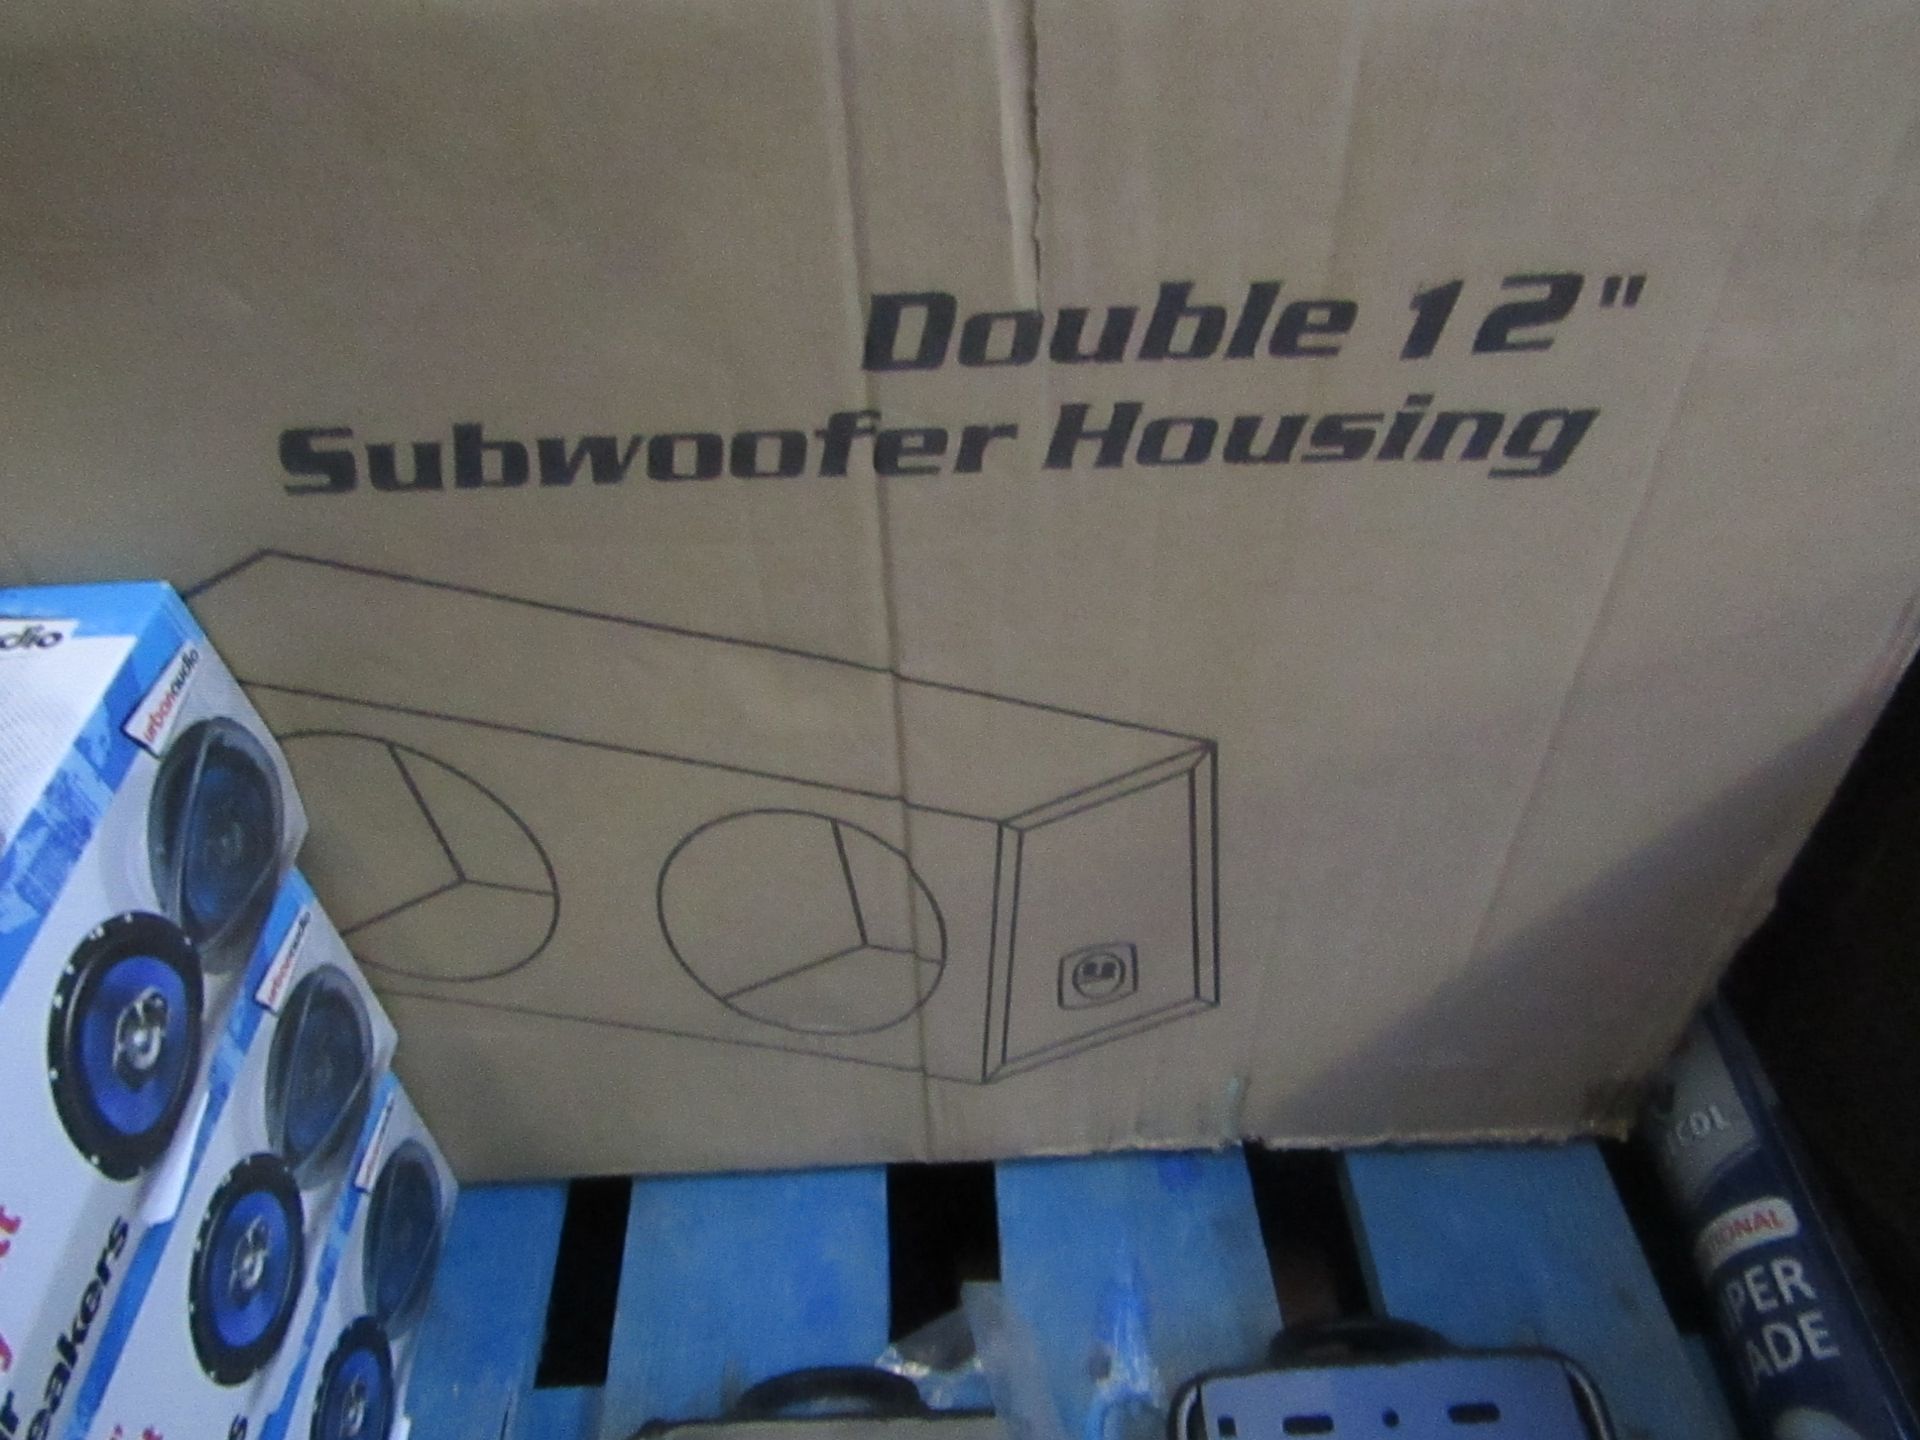 XL Series - Double 12" Subwoofer Box Housng (Bare Unit) - Unchecked & Boxed.